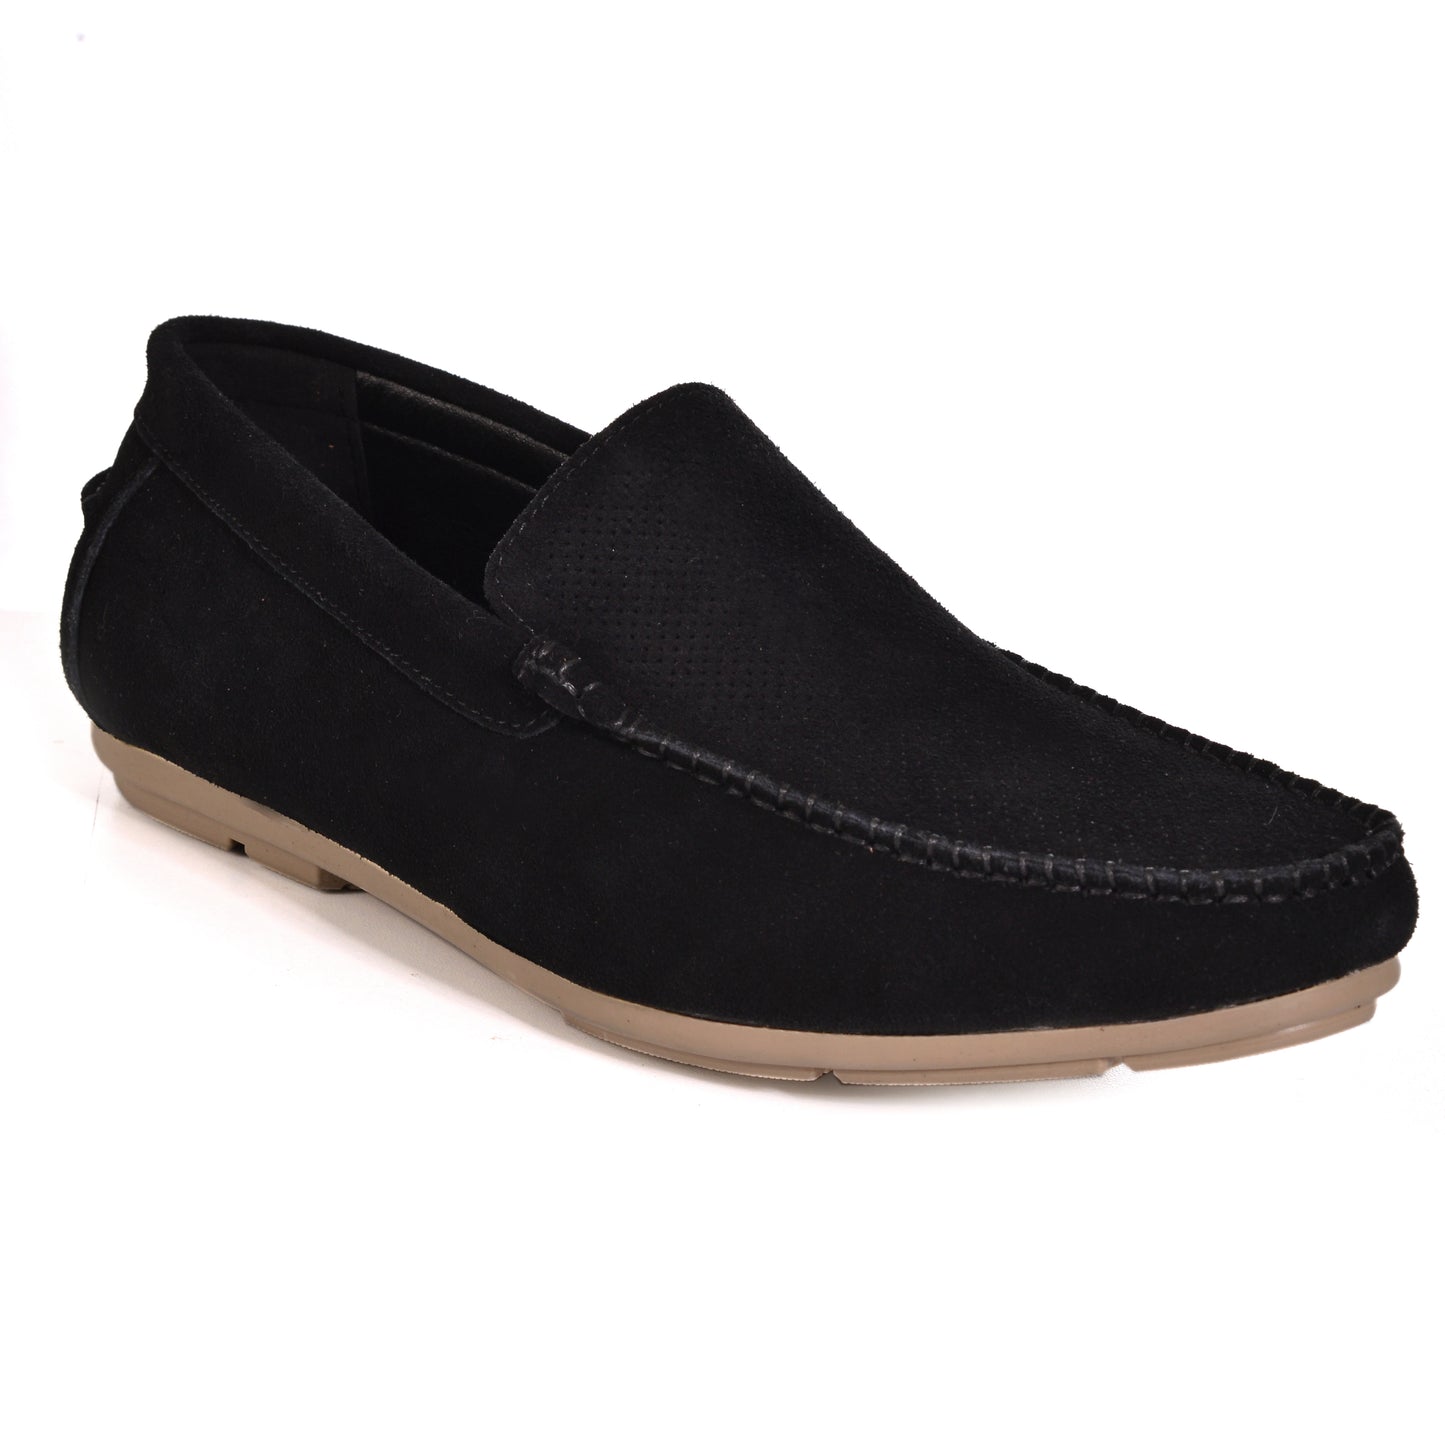 2H #JX20-1 Black Chamois Texture Loafer Moccasin